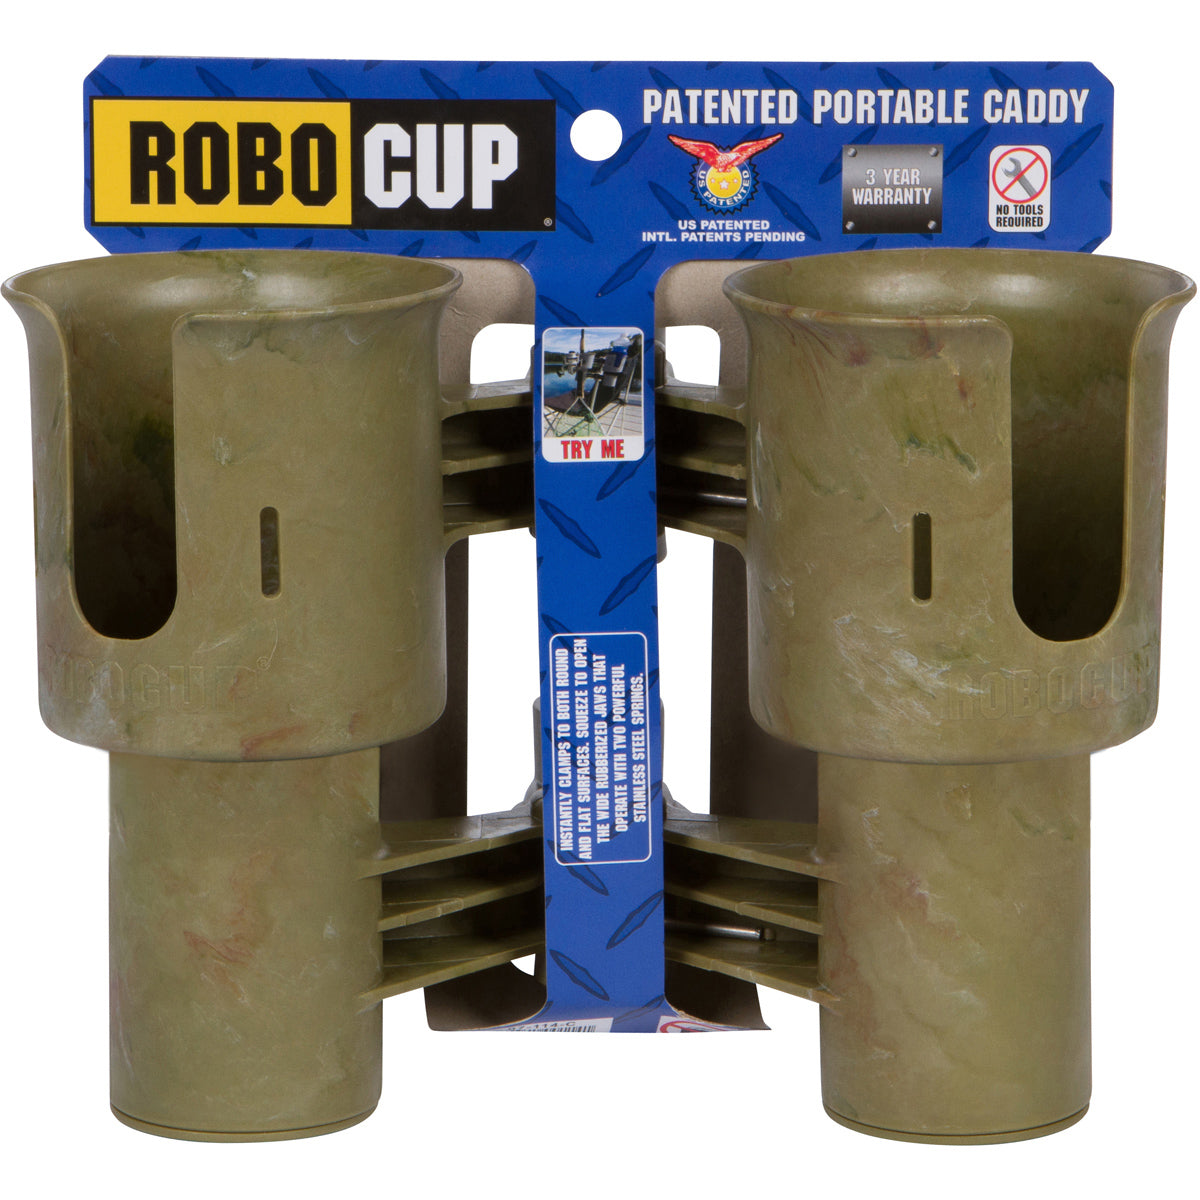 RoboCup CAMO Patented Clamp on Caddy Dual Cup, Drink & Rod Holder -   -- ROBOCUP